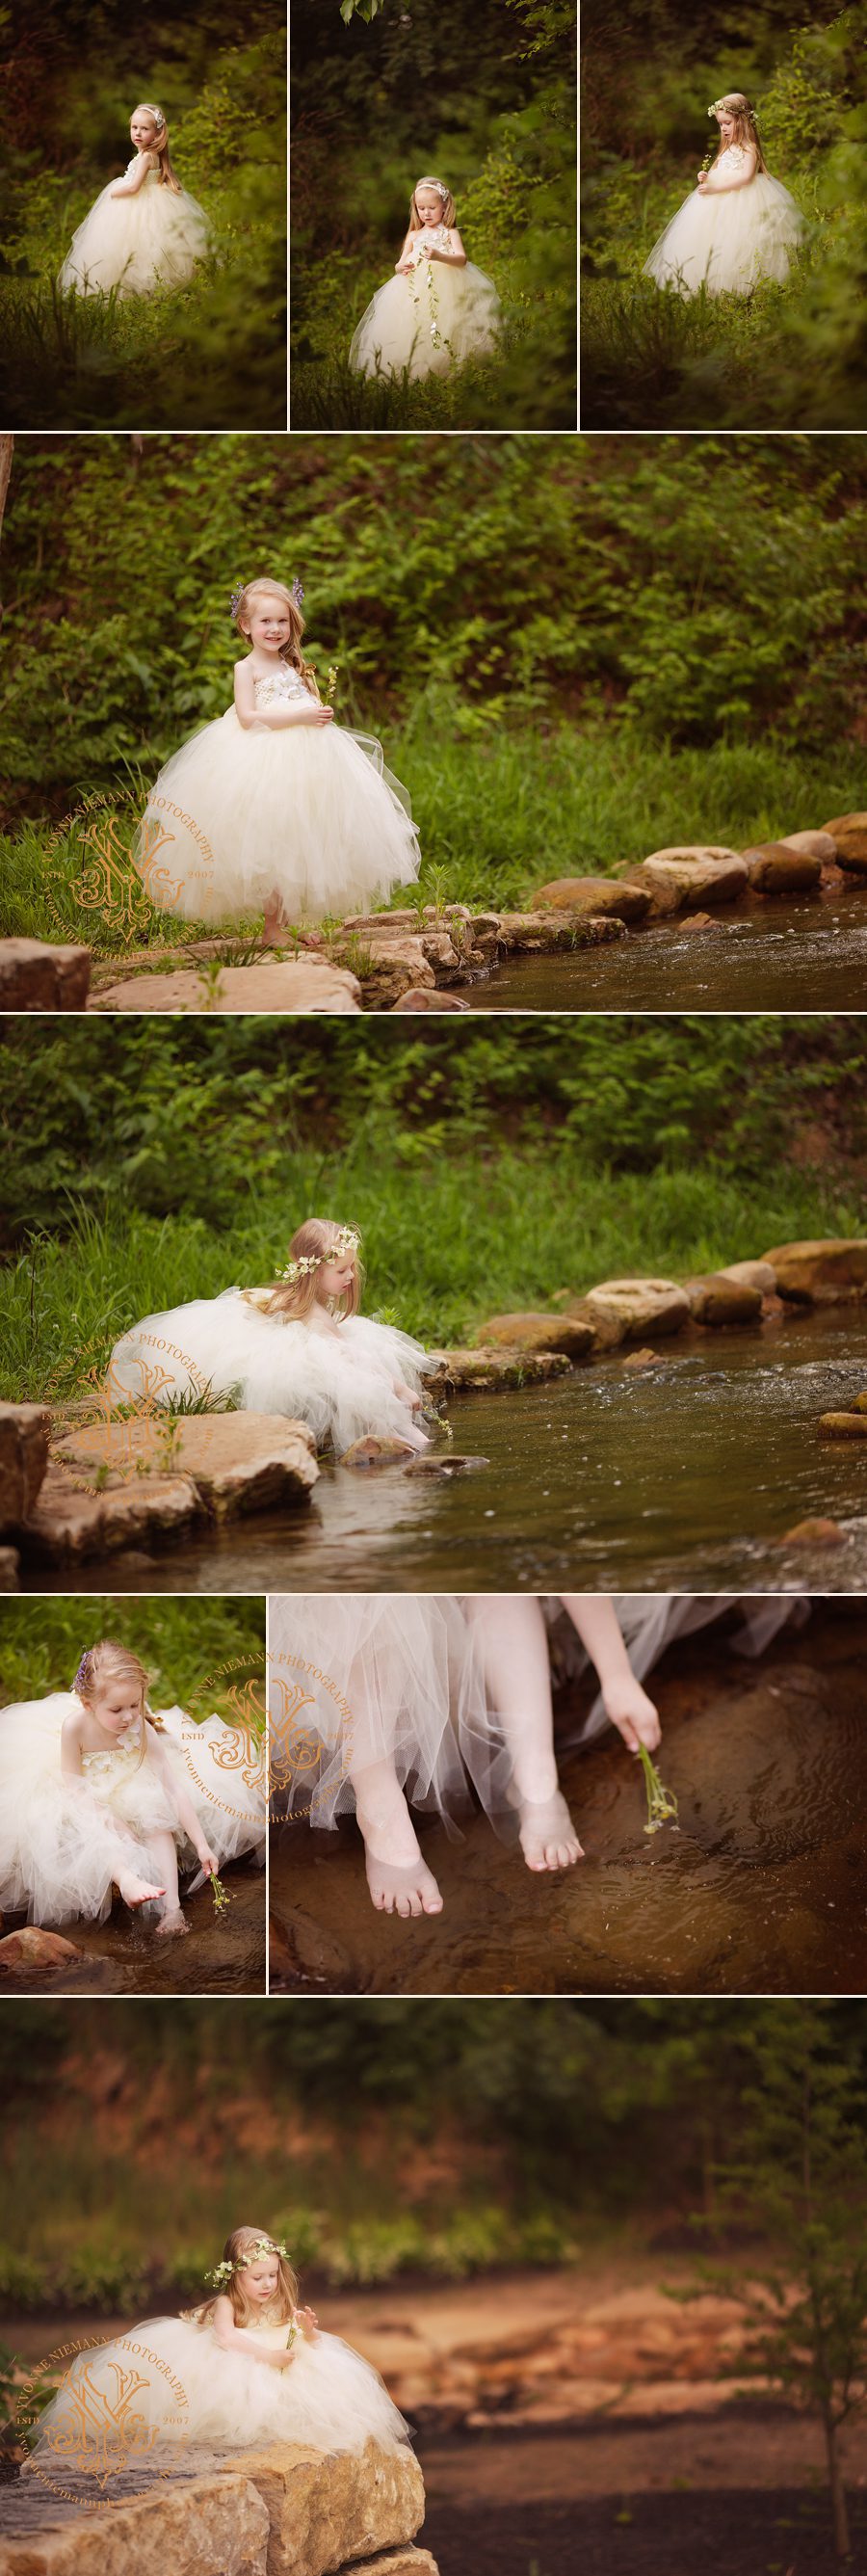 Beautiful forest fairy portraits of a little girl in St. Louis taken by Yvonne Niemann Photography